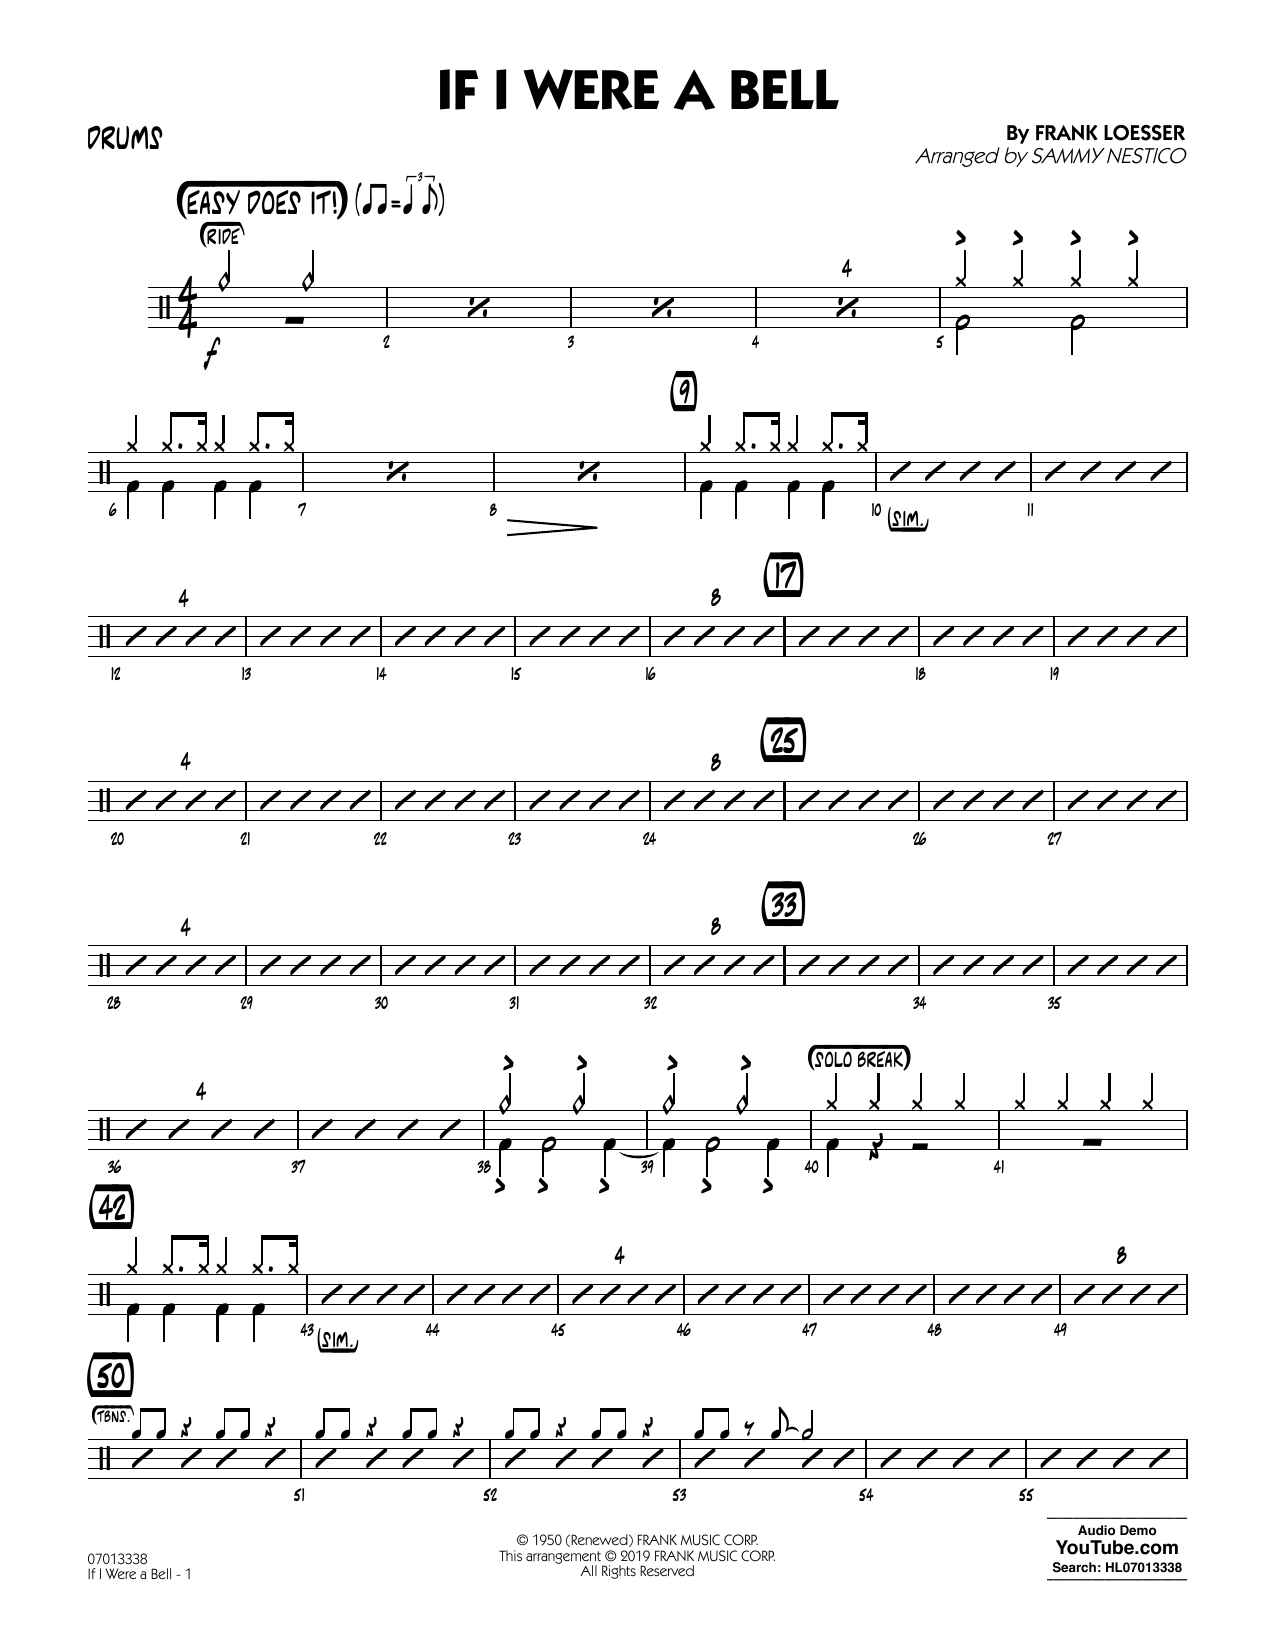 Frank Loesser If I Were a Bell (arr. Sammy Nestico) - Drums sheet music preview music notes and score for Jazz Ensemble including 2 page(s)